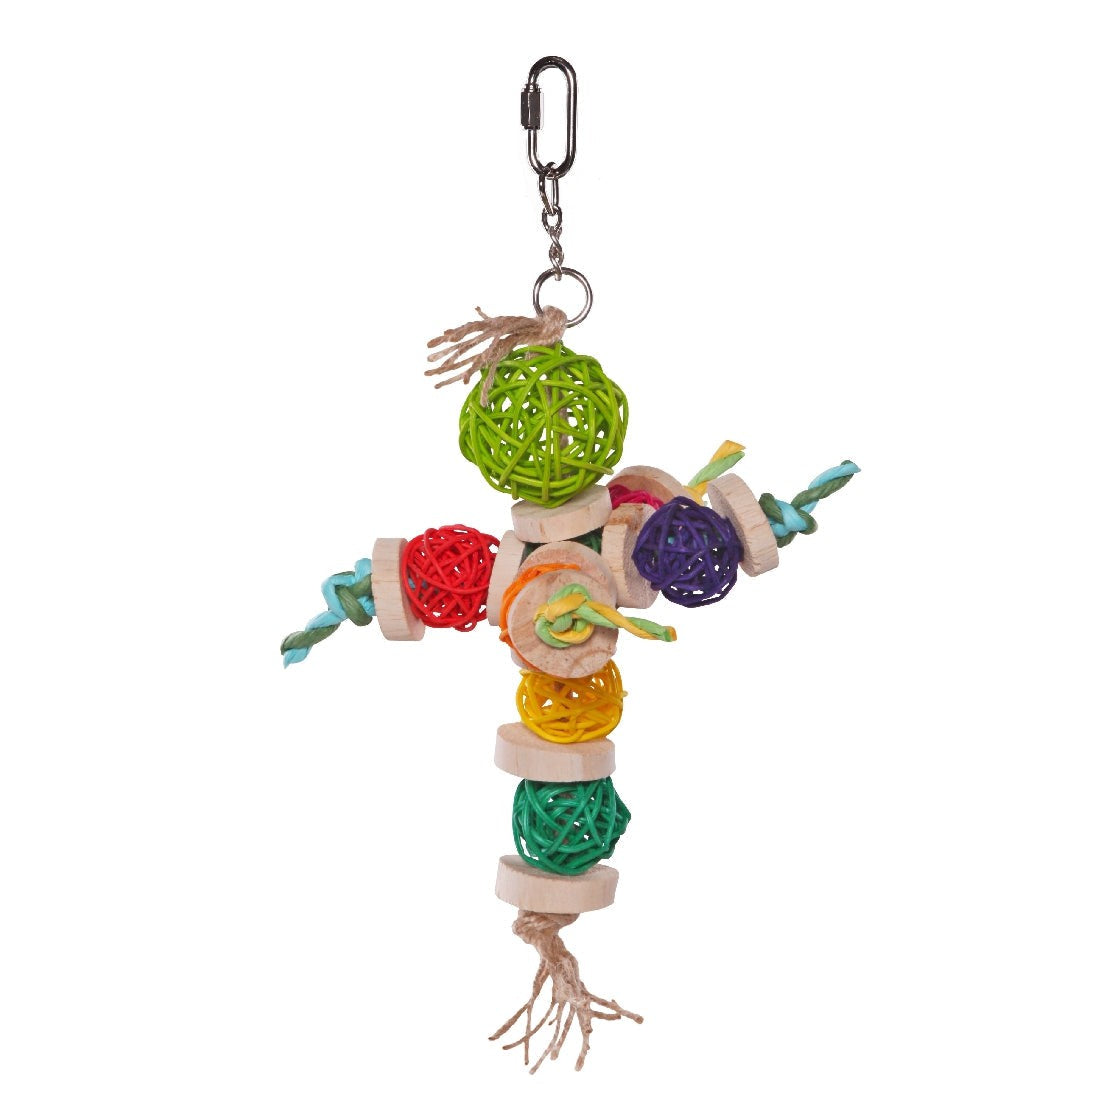 Colorful hanging bird toy with rattan balls and wooden blocks.